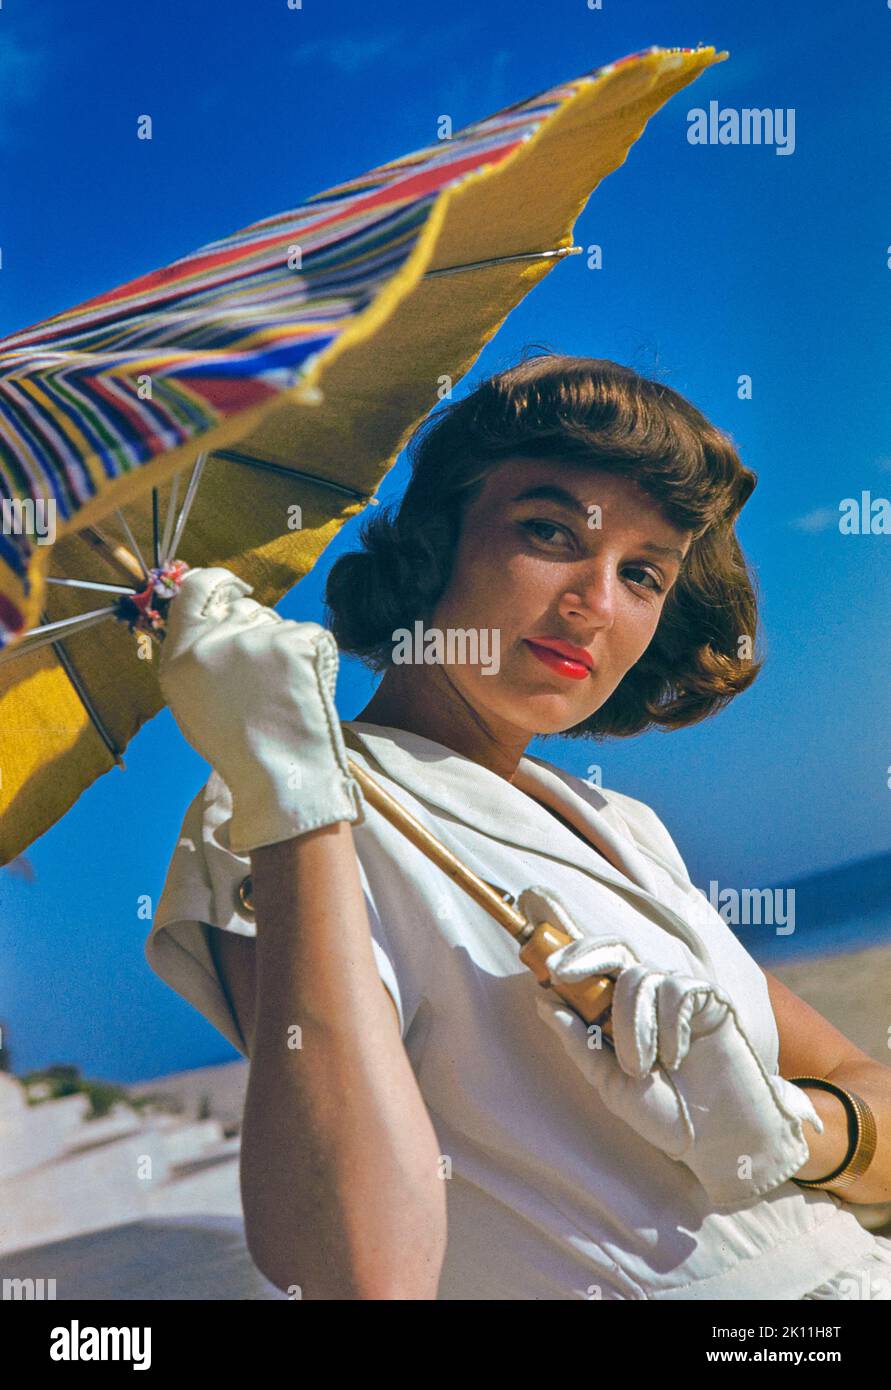 Young Adult Woman in White Dress with Sun Umbrella, Toni Frissell Collection Stock Photo